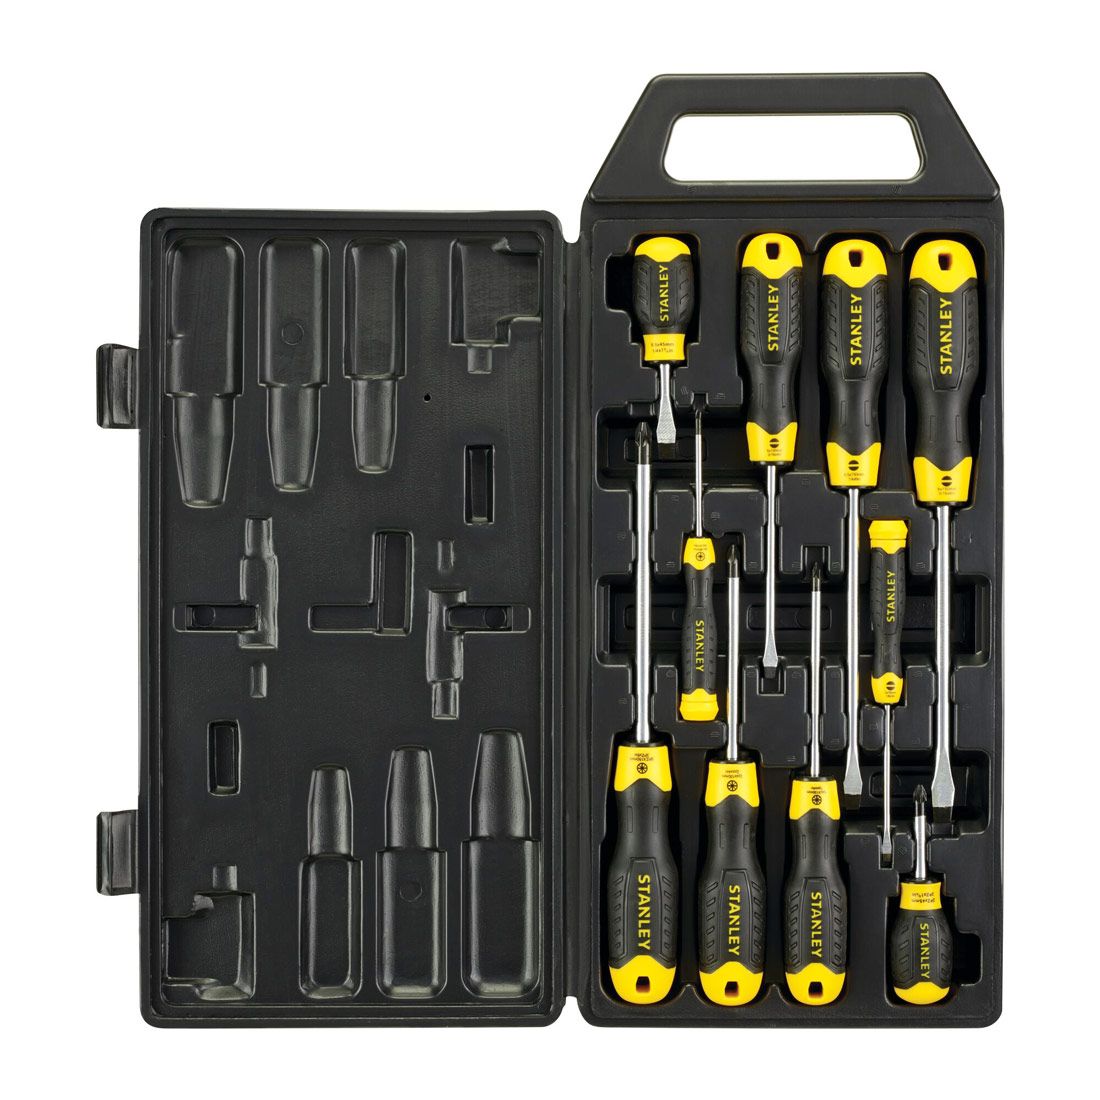 STANLEY 2-65-014 FLARED / POZI CUSHION GRIP SCREWDRIVER SET X10 PCS IN CARRY CASE